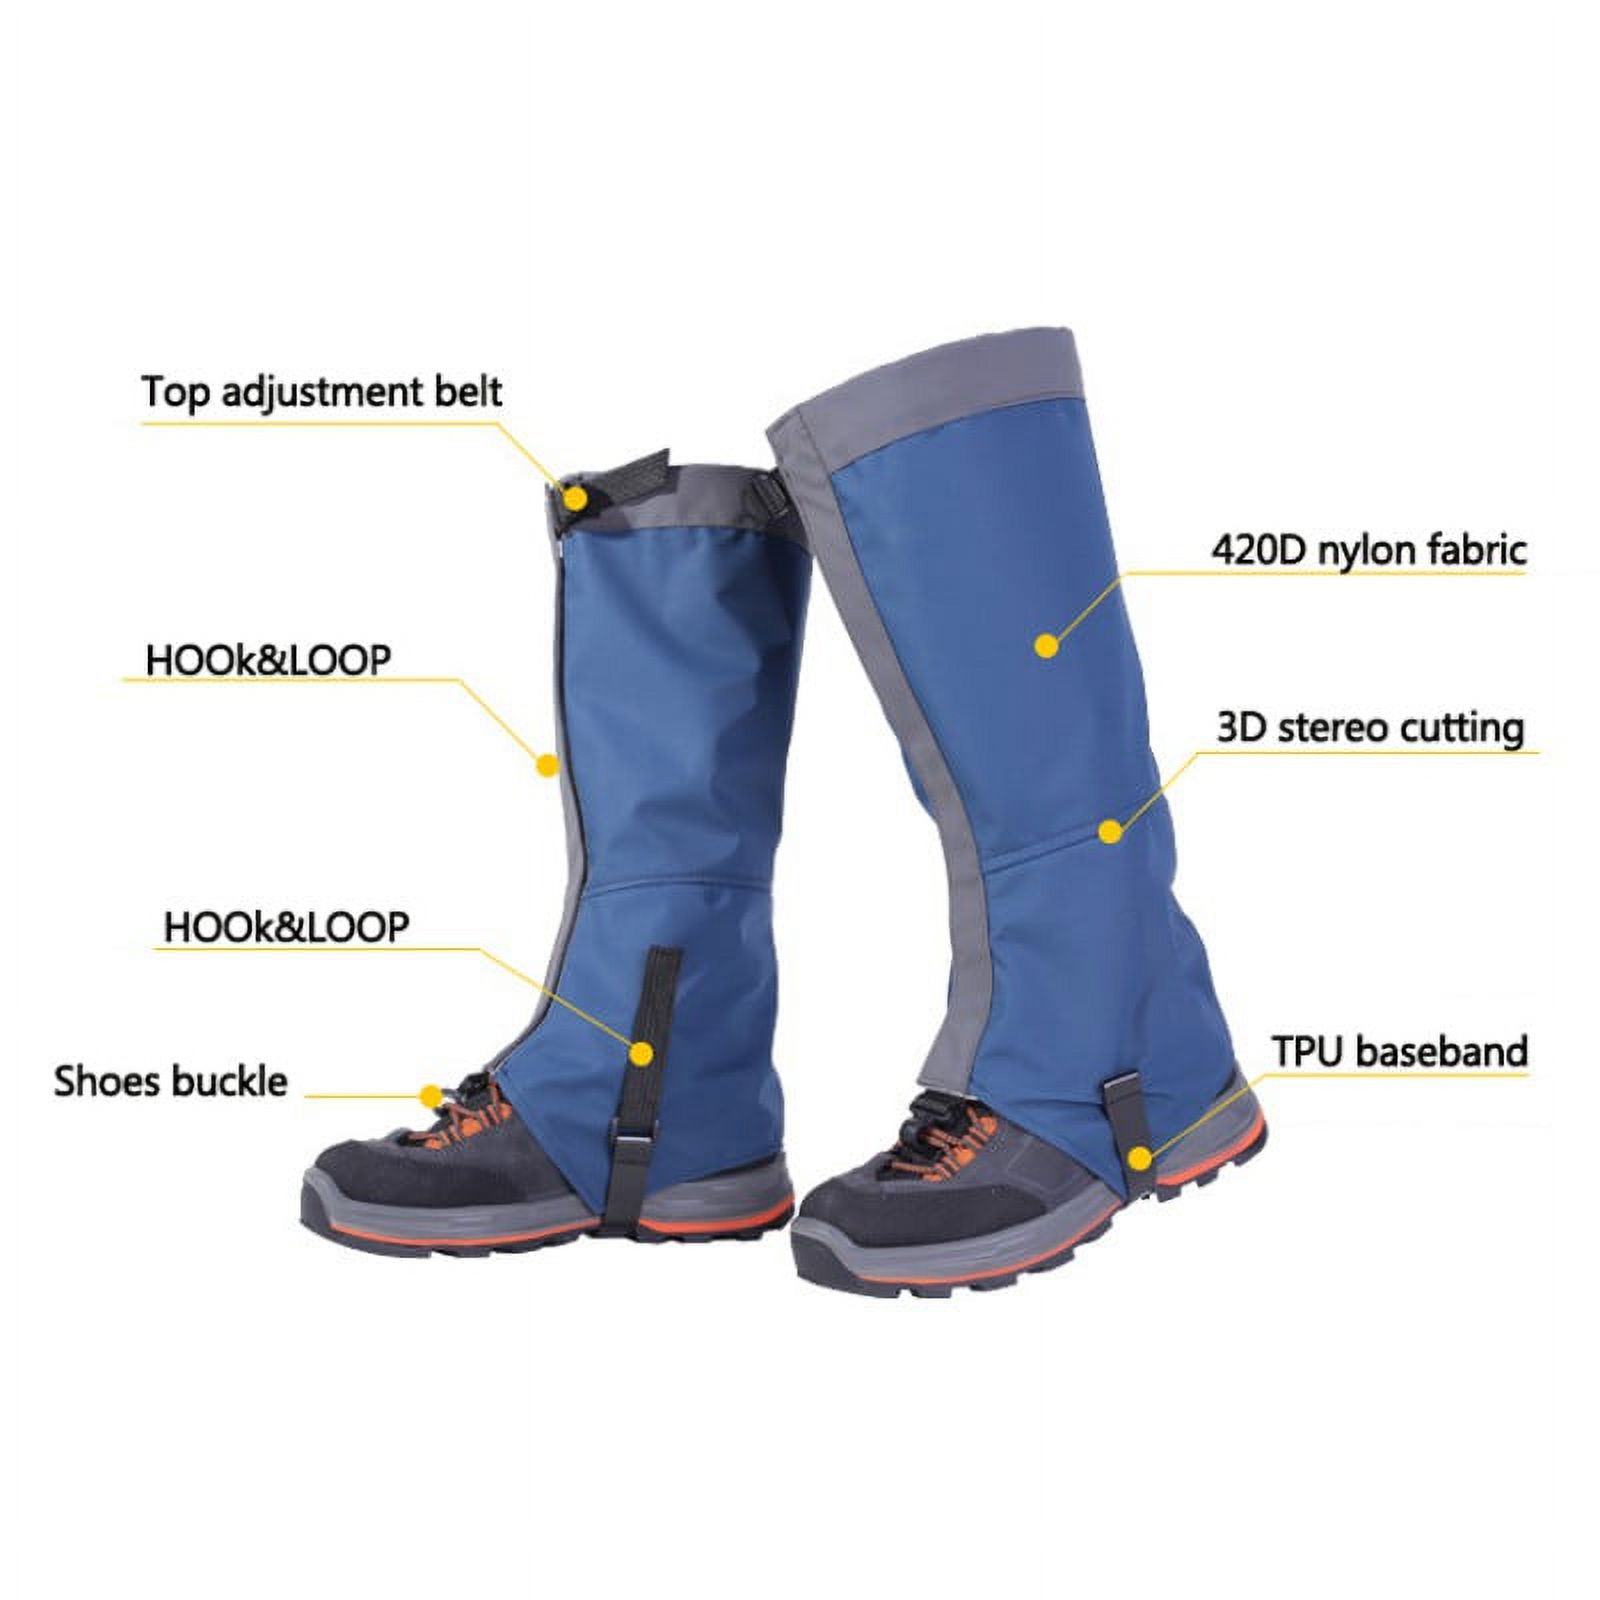 Outdoor Mountain Hiking Hunting Boot Gaiters Waterproof Snow Snake High Leg Shoes Cover - image 3 of 9